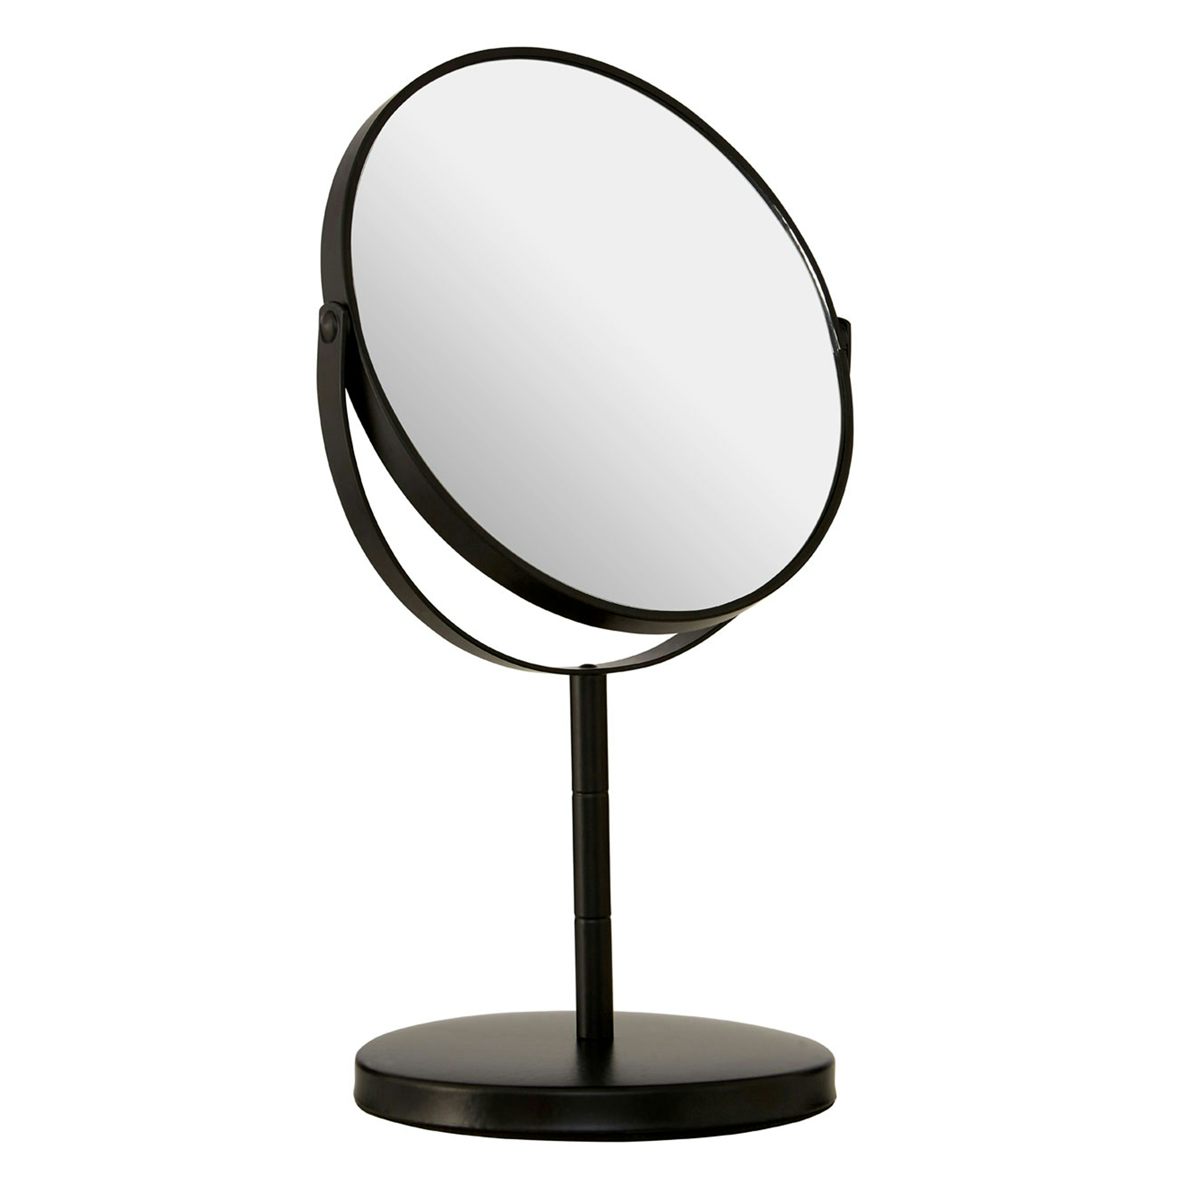 Accents Black large freestanding vanity mirror with 2x magnification